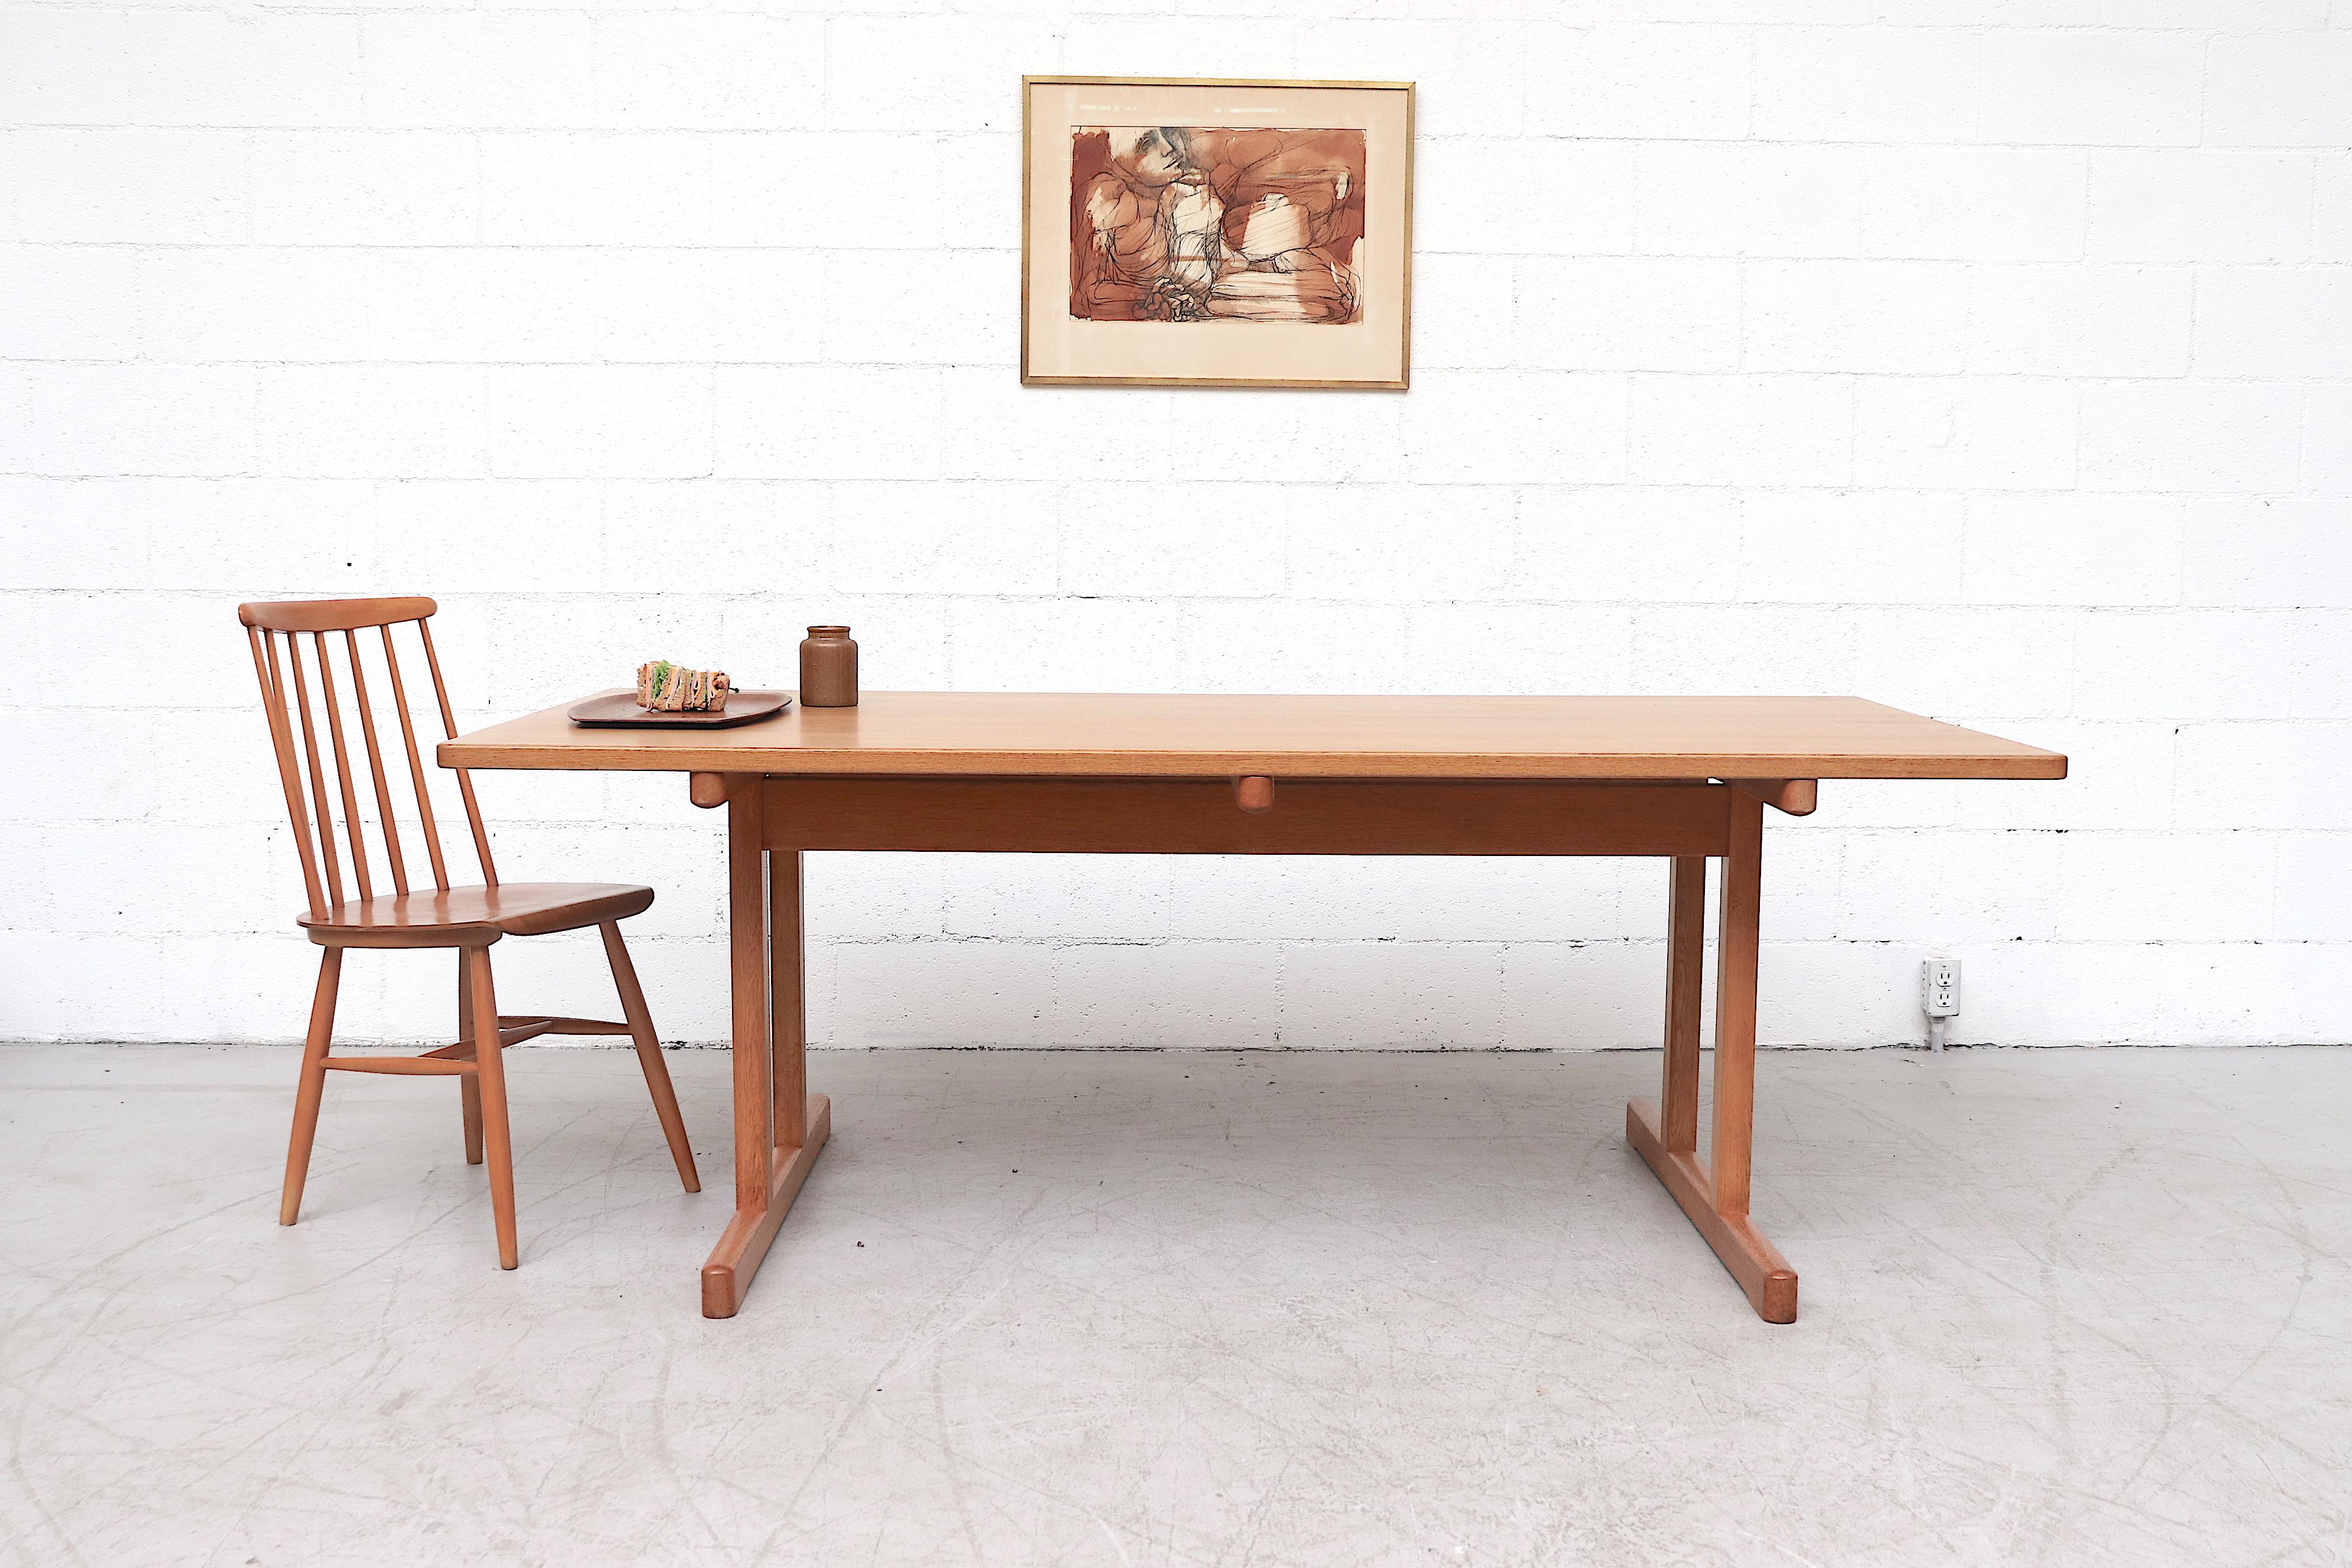 A Børge Mogensen Classic oak dining table by for Fredericia, Designed in 1964. Borge Mogensen was heavily inspired by the American shaker movement and design several pieces around this style. Lightly refinished wood, in otherwise good original